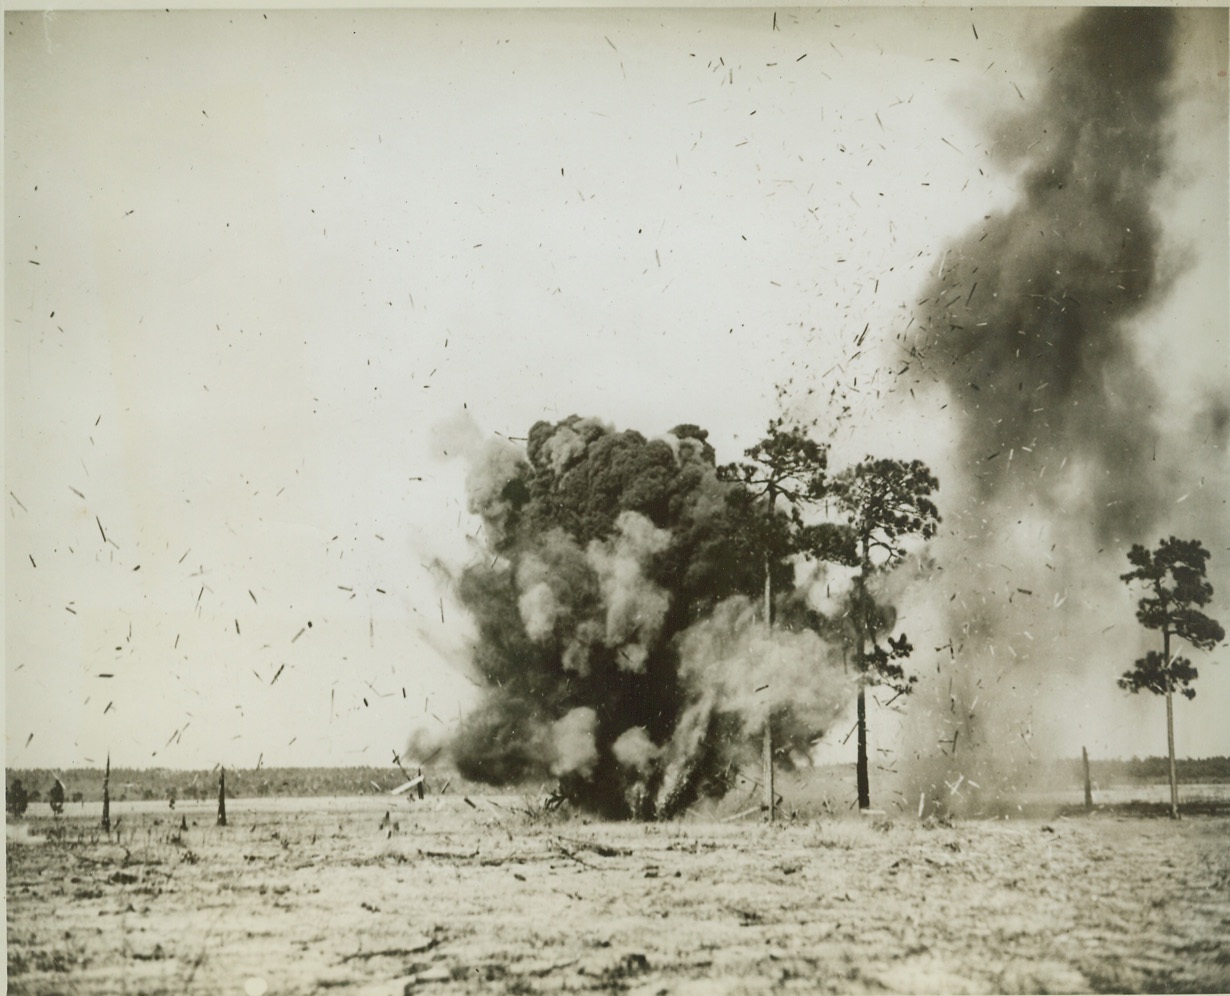 DIRECT HIT BY LONG-RANGE RIFLE, 3/29/1942. FORT BRAGG, N.C. – Debris flies in all directions as a shell from a 155mm Field Rifle scores a direct hit on a wooden shack during target practice by the 36th Field Artillery. The 155mm Rifle is the longest range – about 17 miles- field piece used by the U.S. Army Credit: OWI Radiophoto from ACME;